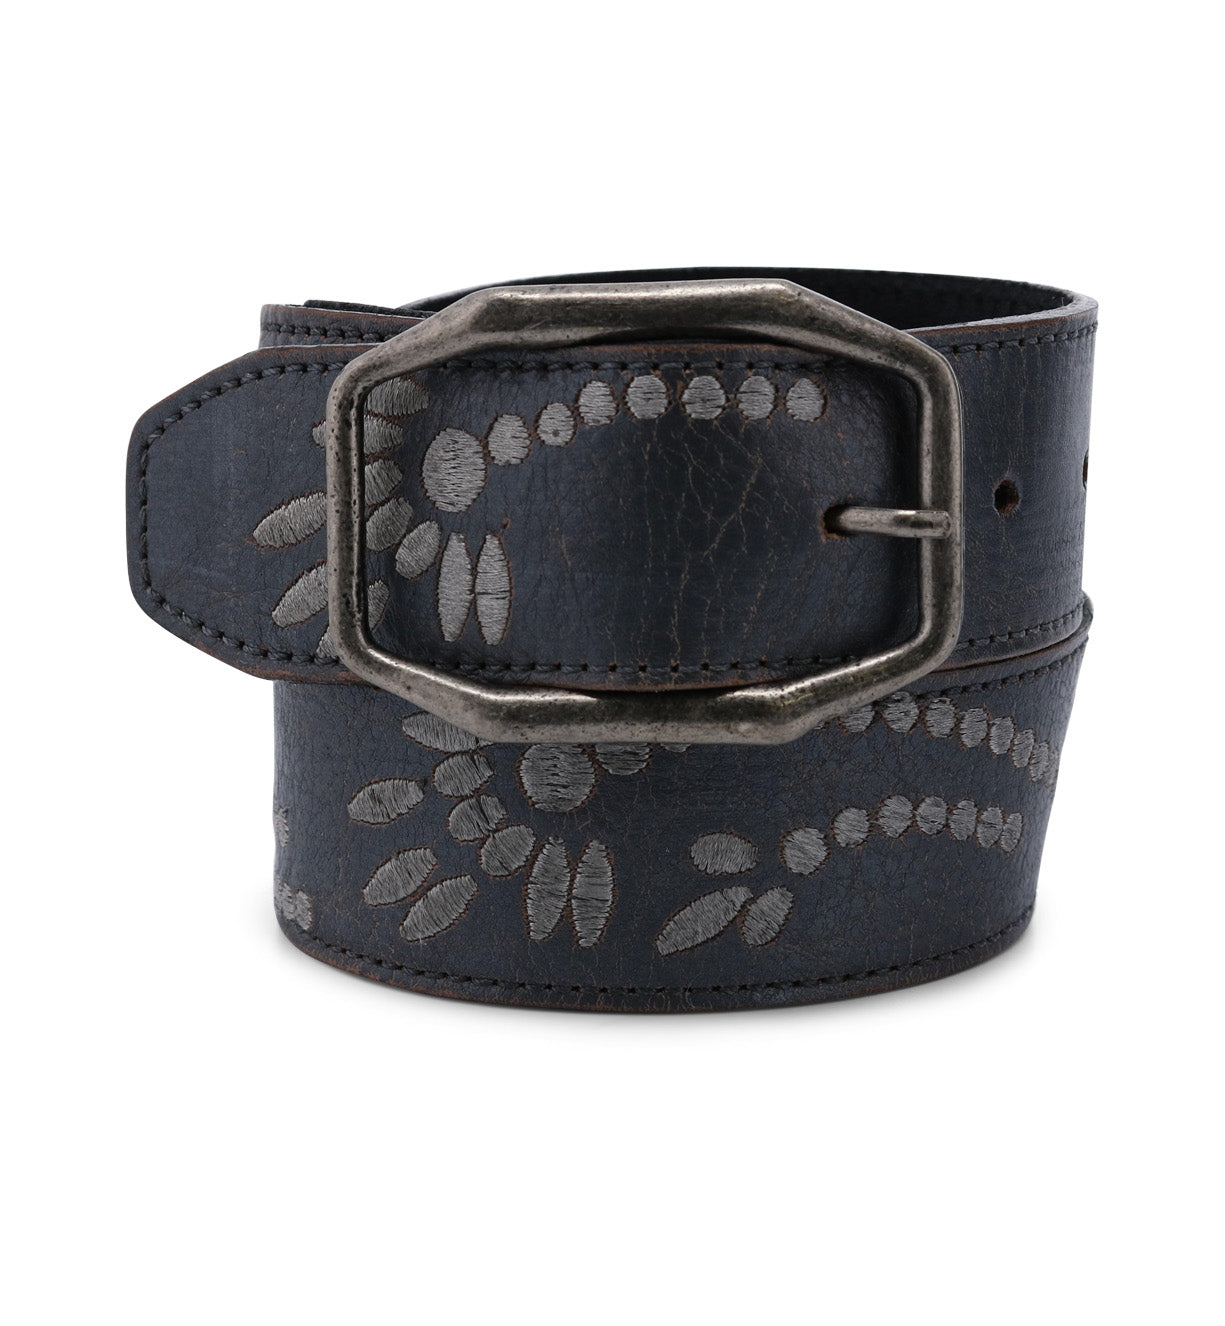 A Mohawk belt by Bed Stu, with a silver buckle.